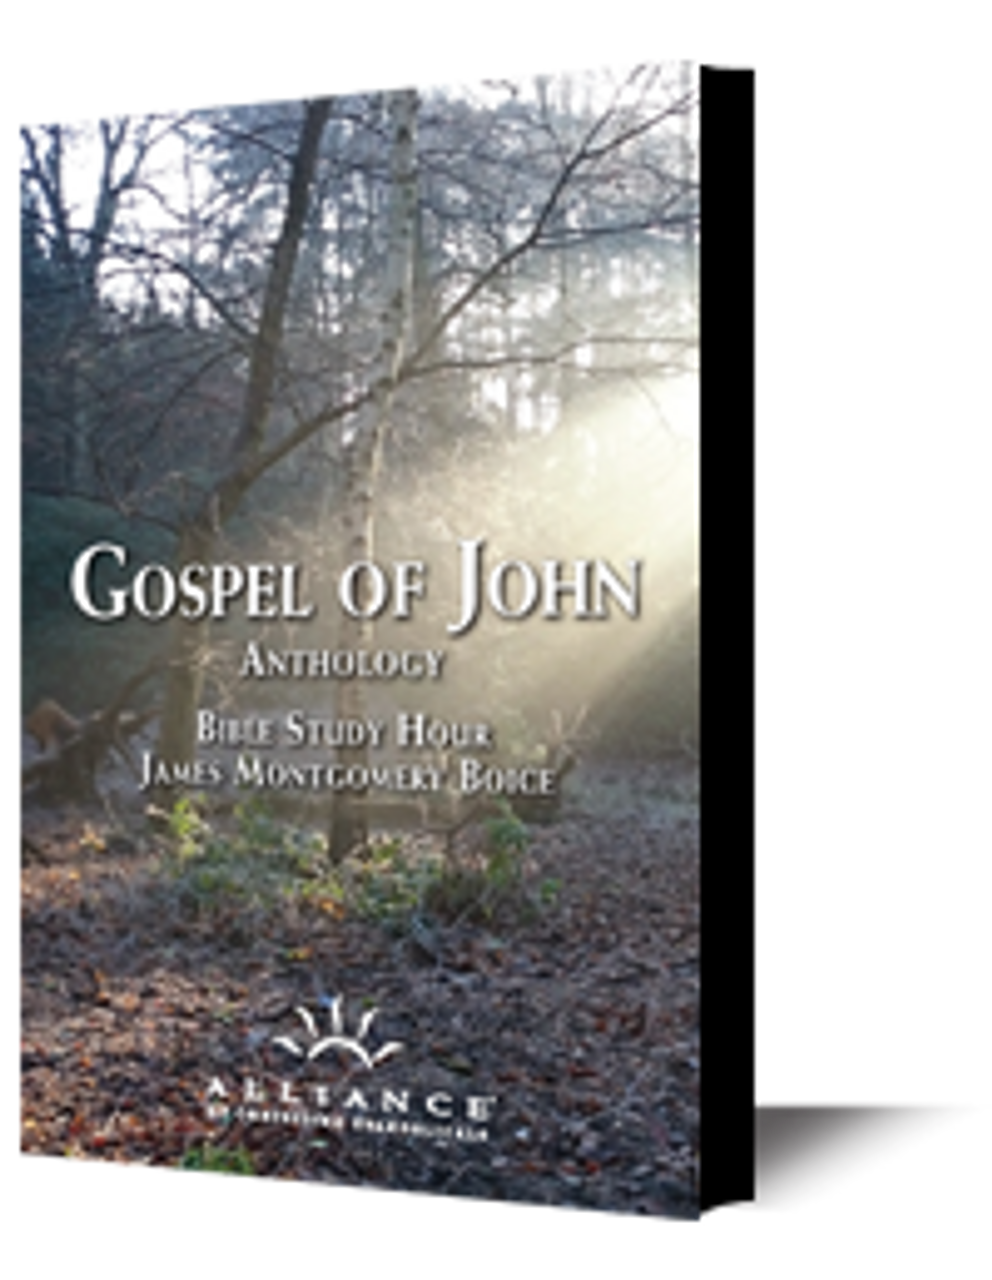 Christ and Judaism (mp3 download)